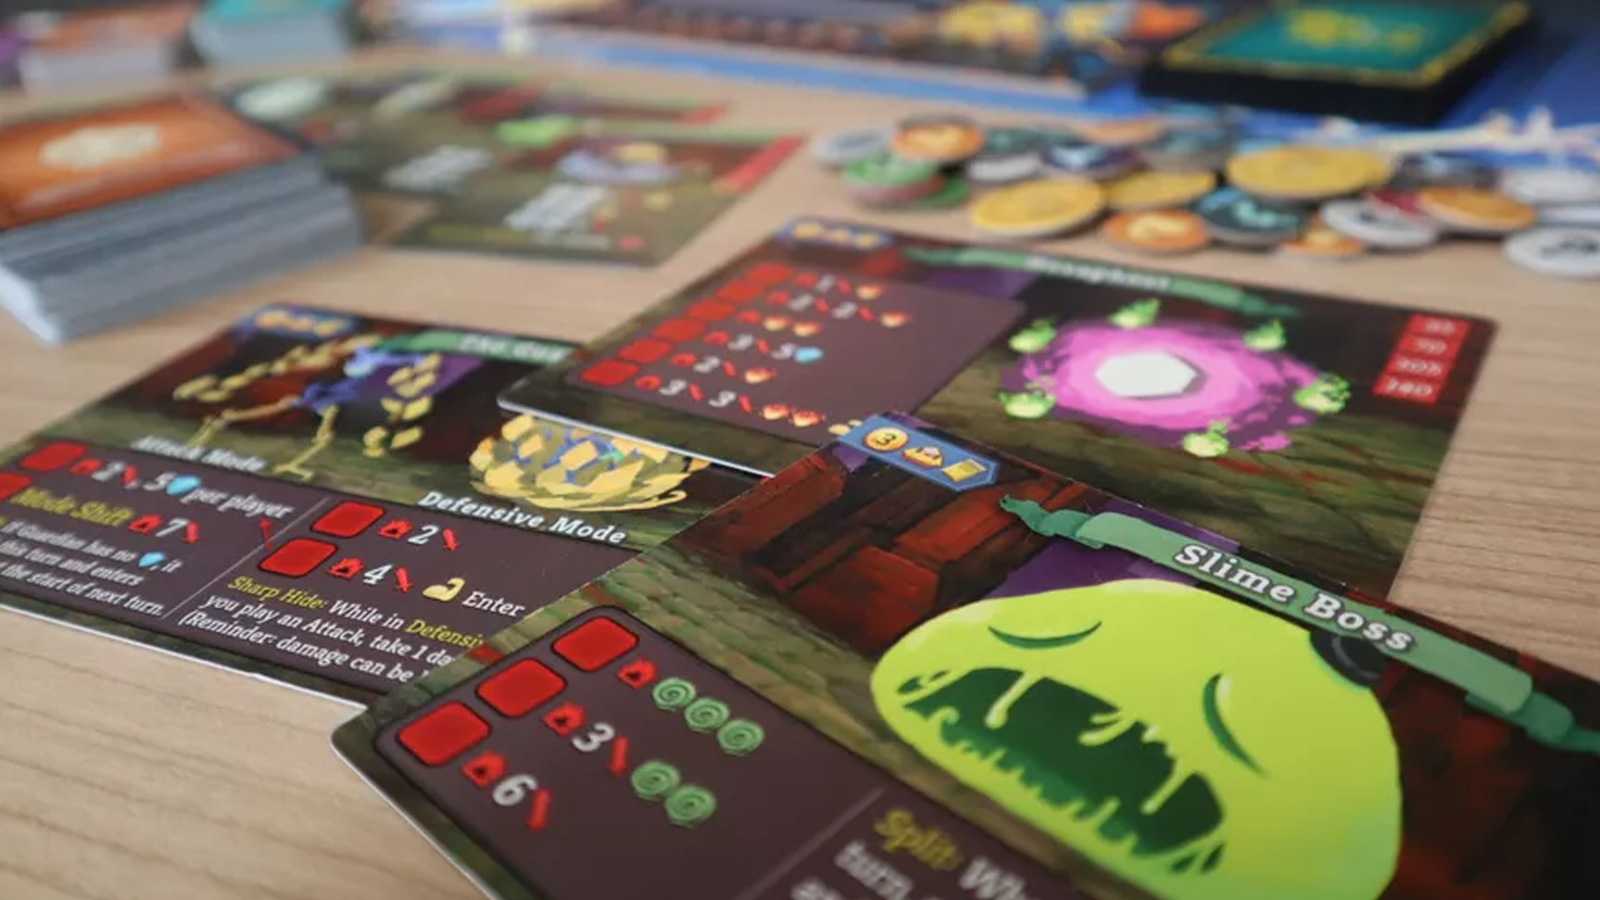 2-player board games that probably won't ruin your friendships